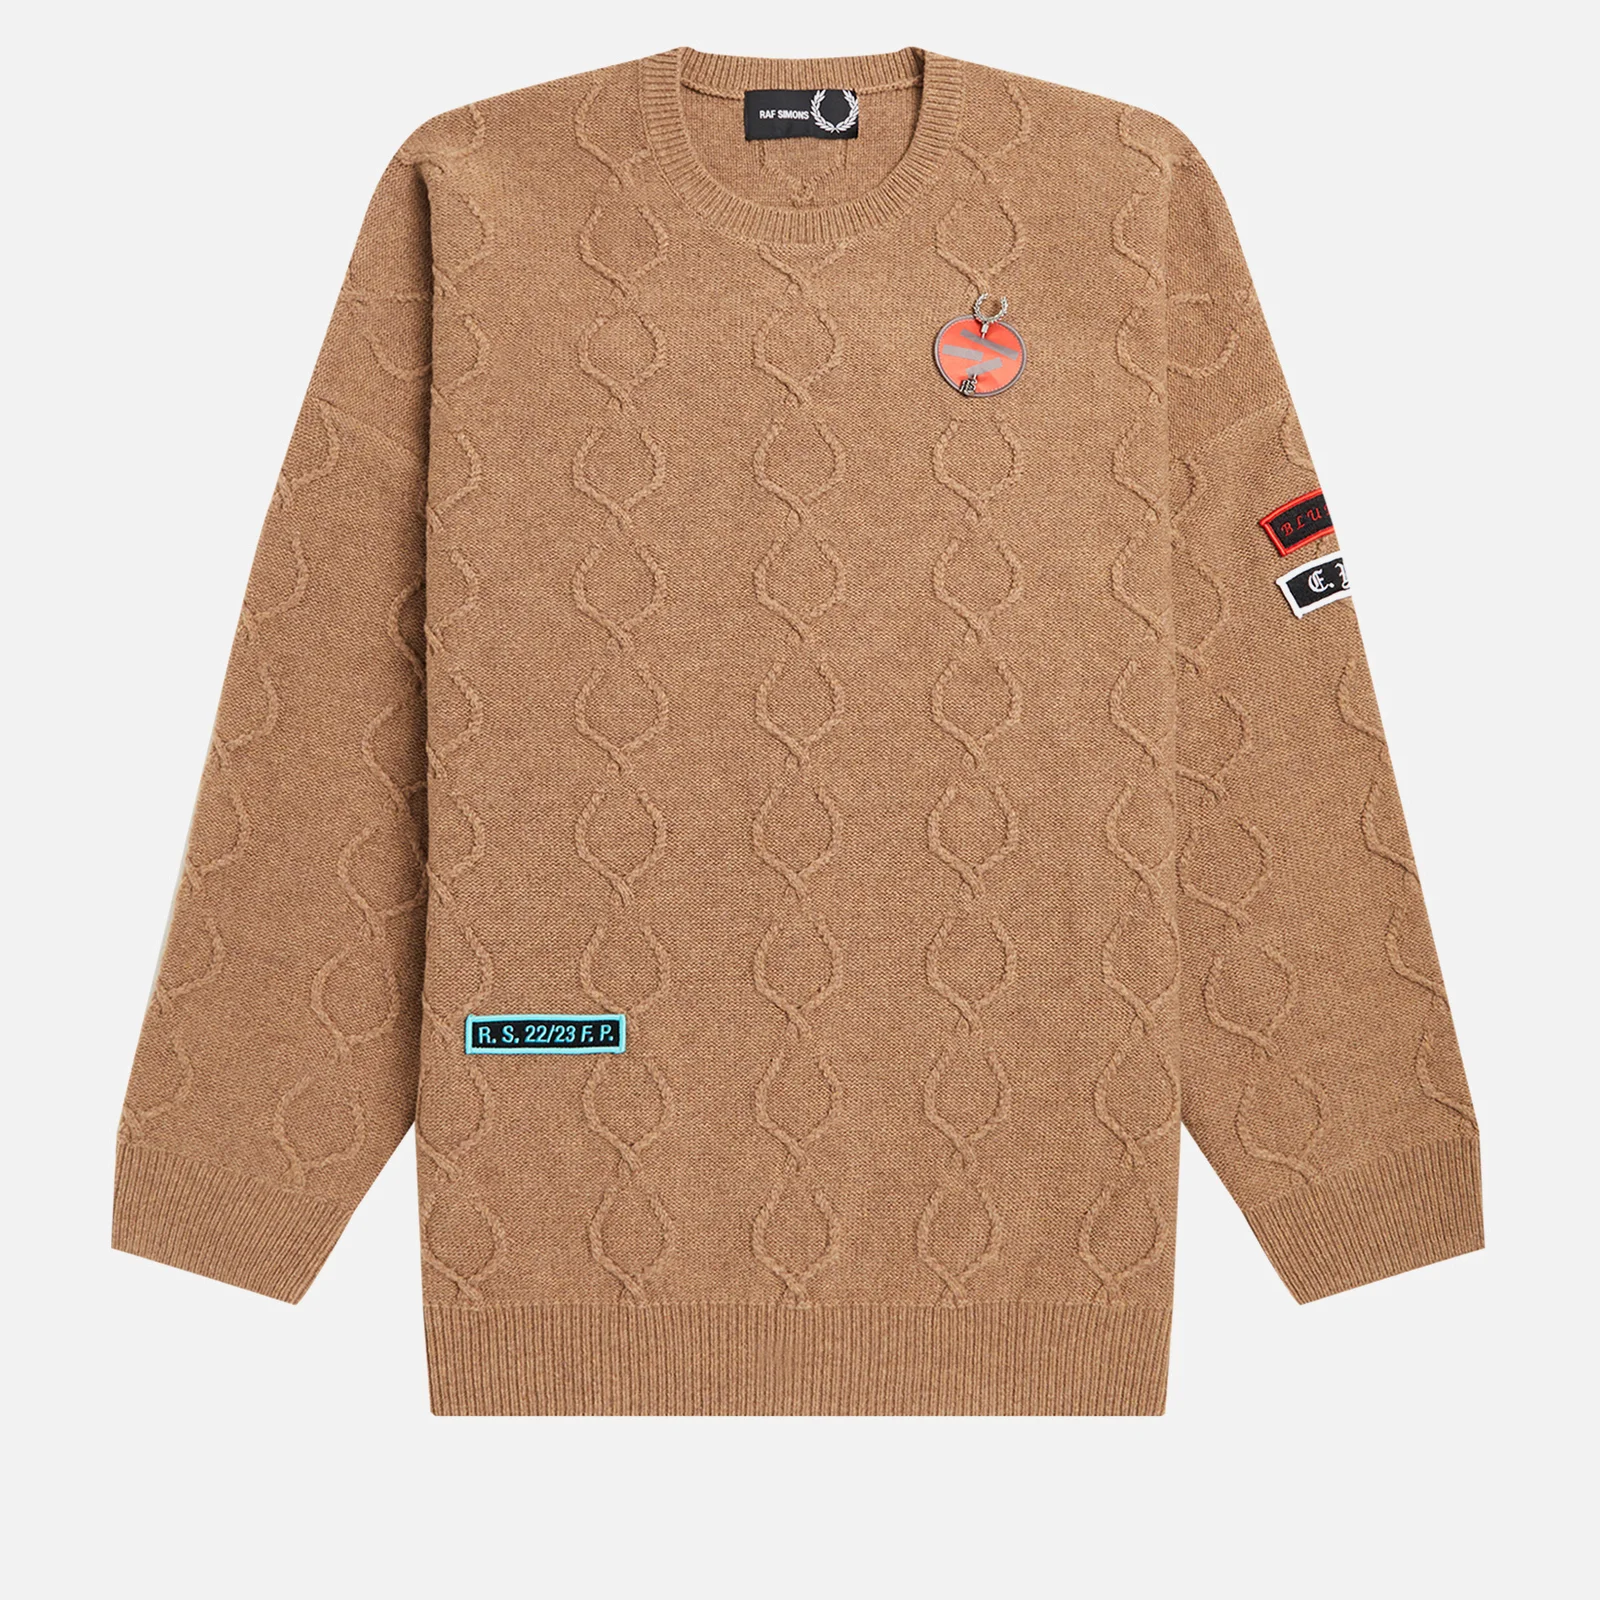 Fred Perry x Raf Simons Oversized Wool Jumper Image 1